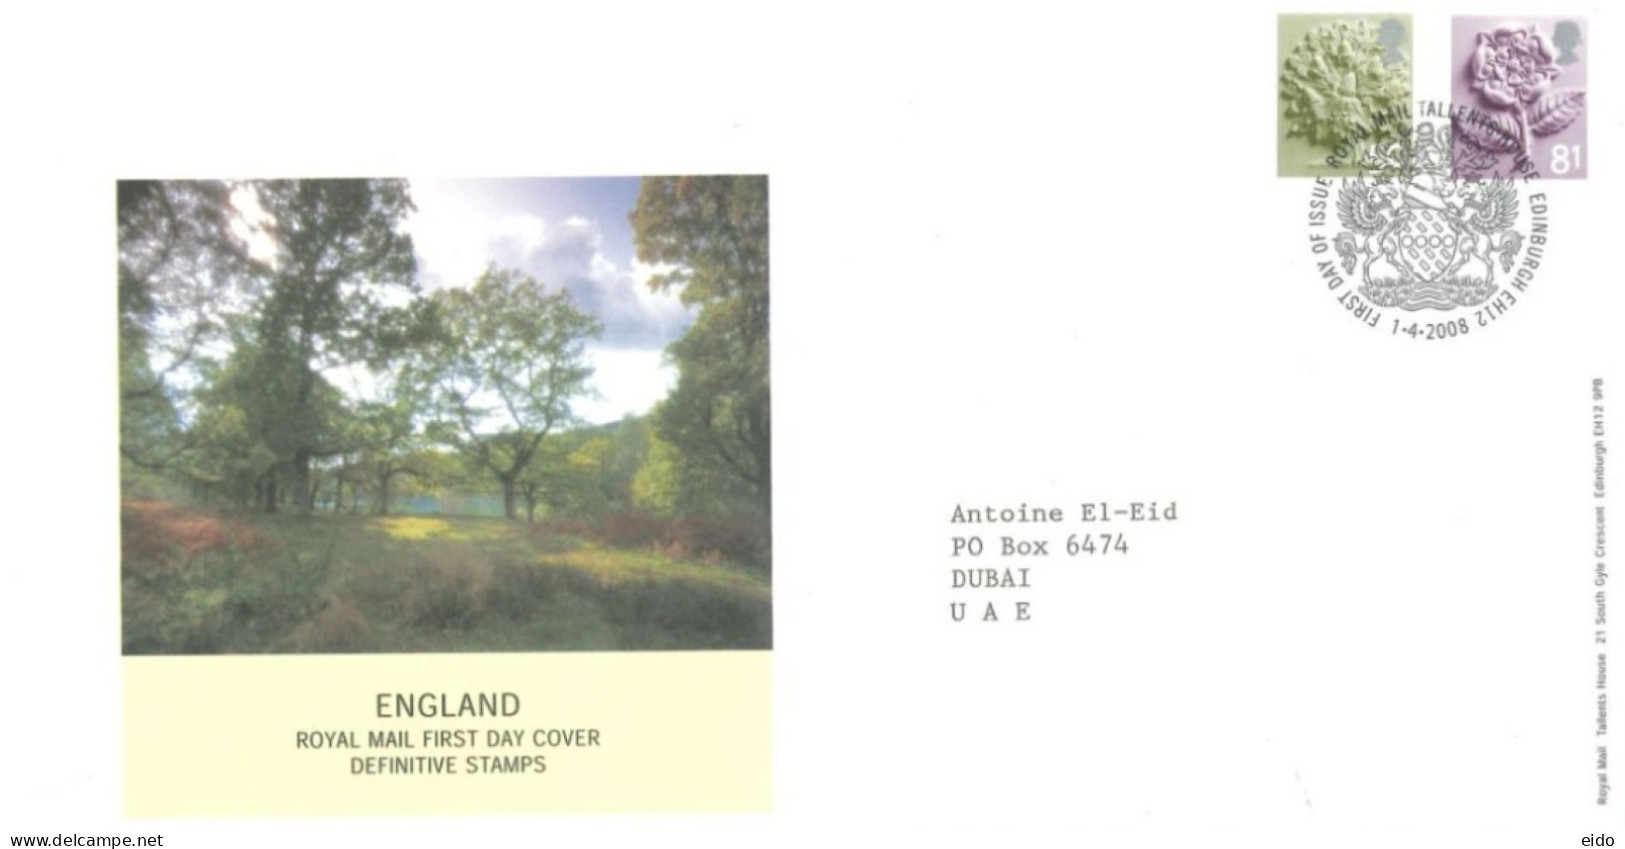 GREAT BRITAIN - 2008, FDC OF ENGLAND ROYAL MAIL DEFINITIVE STAMPS. - Briefe U. Dokumente